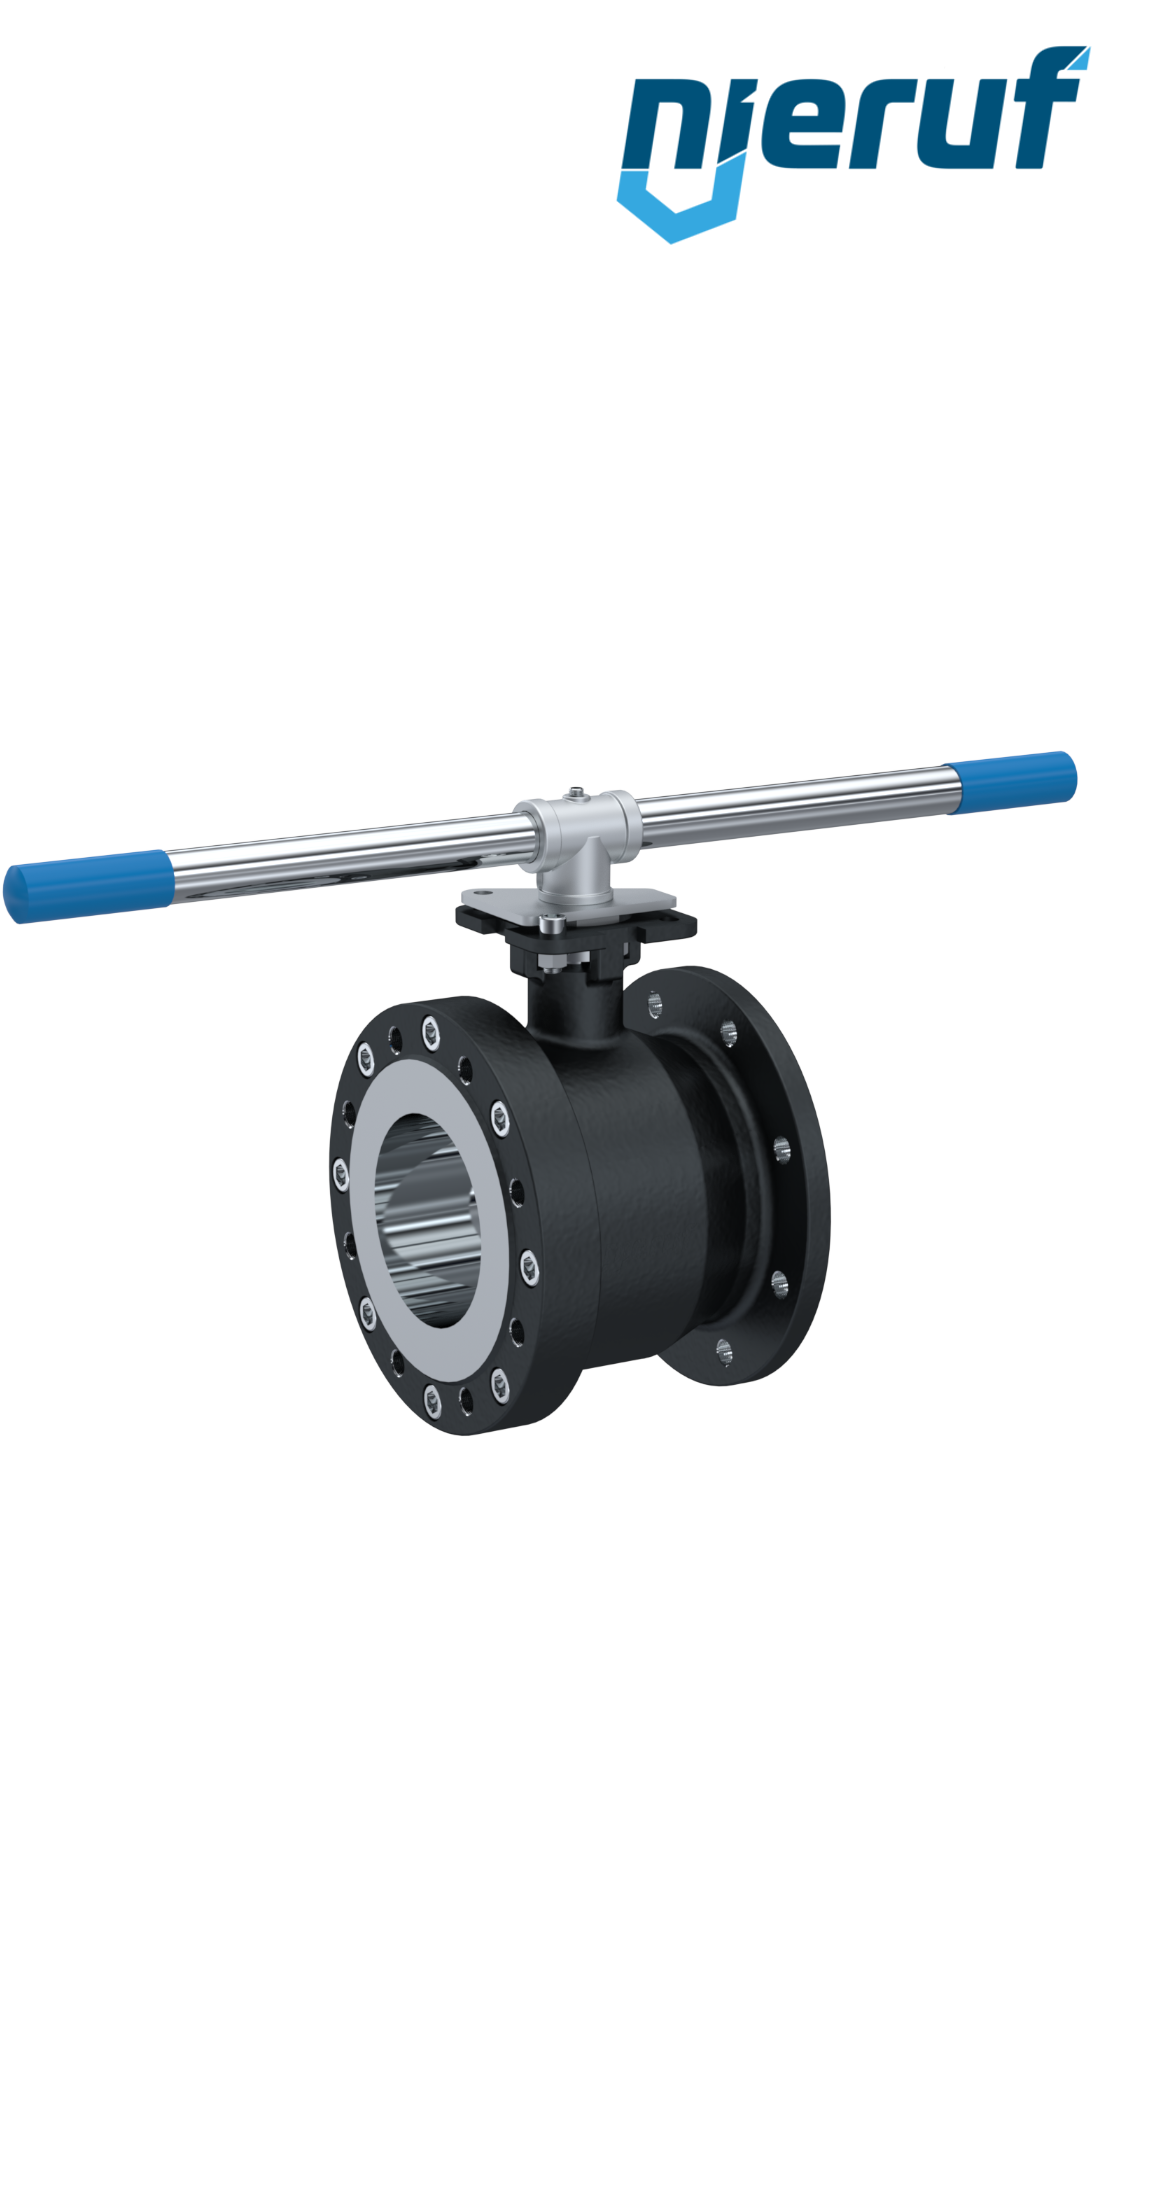 Compact ball valve DN100 PN16 FK03 carbon steel 1.0619 ball stainless steel 1.4408